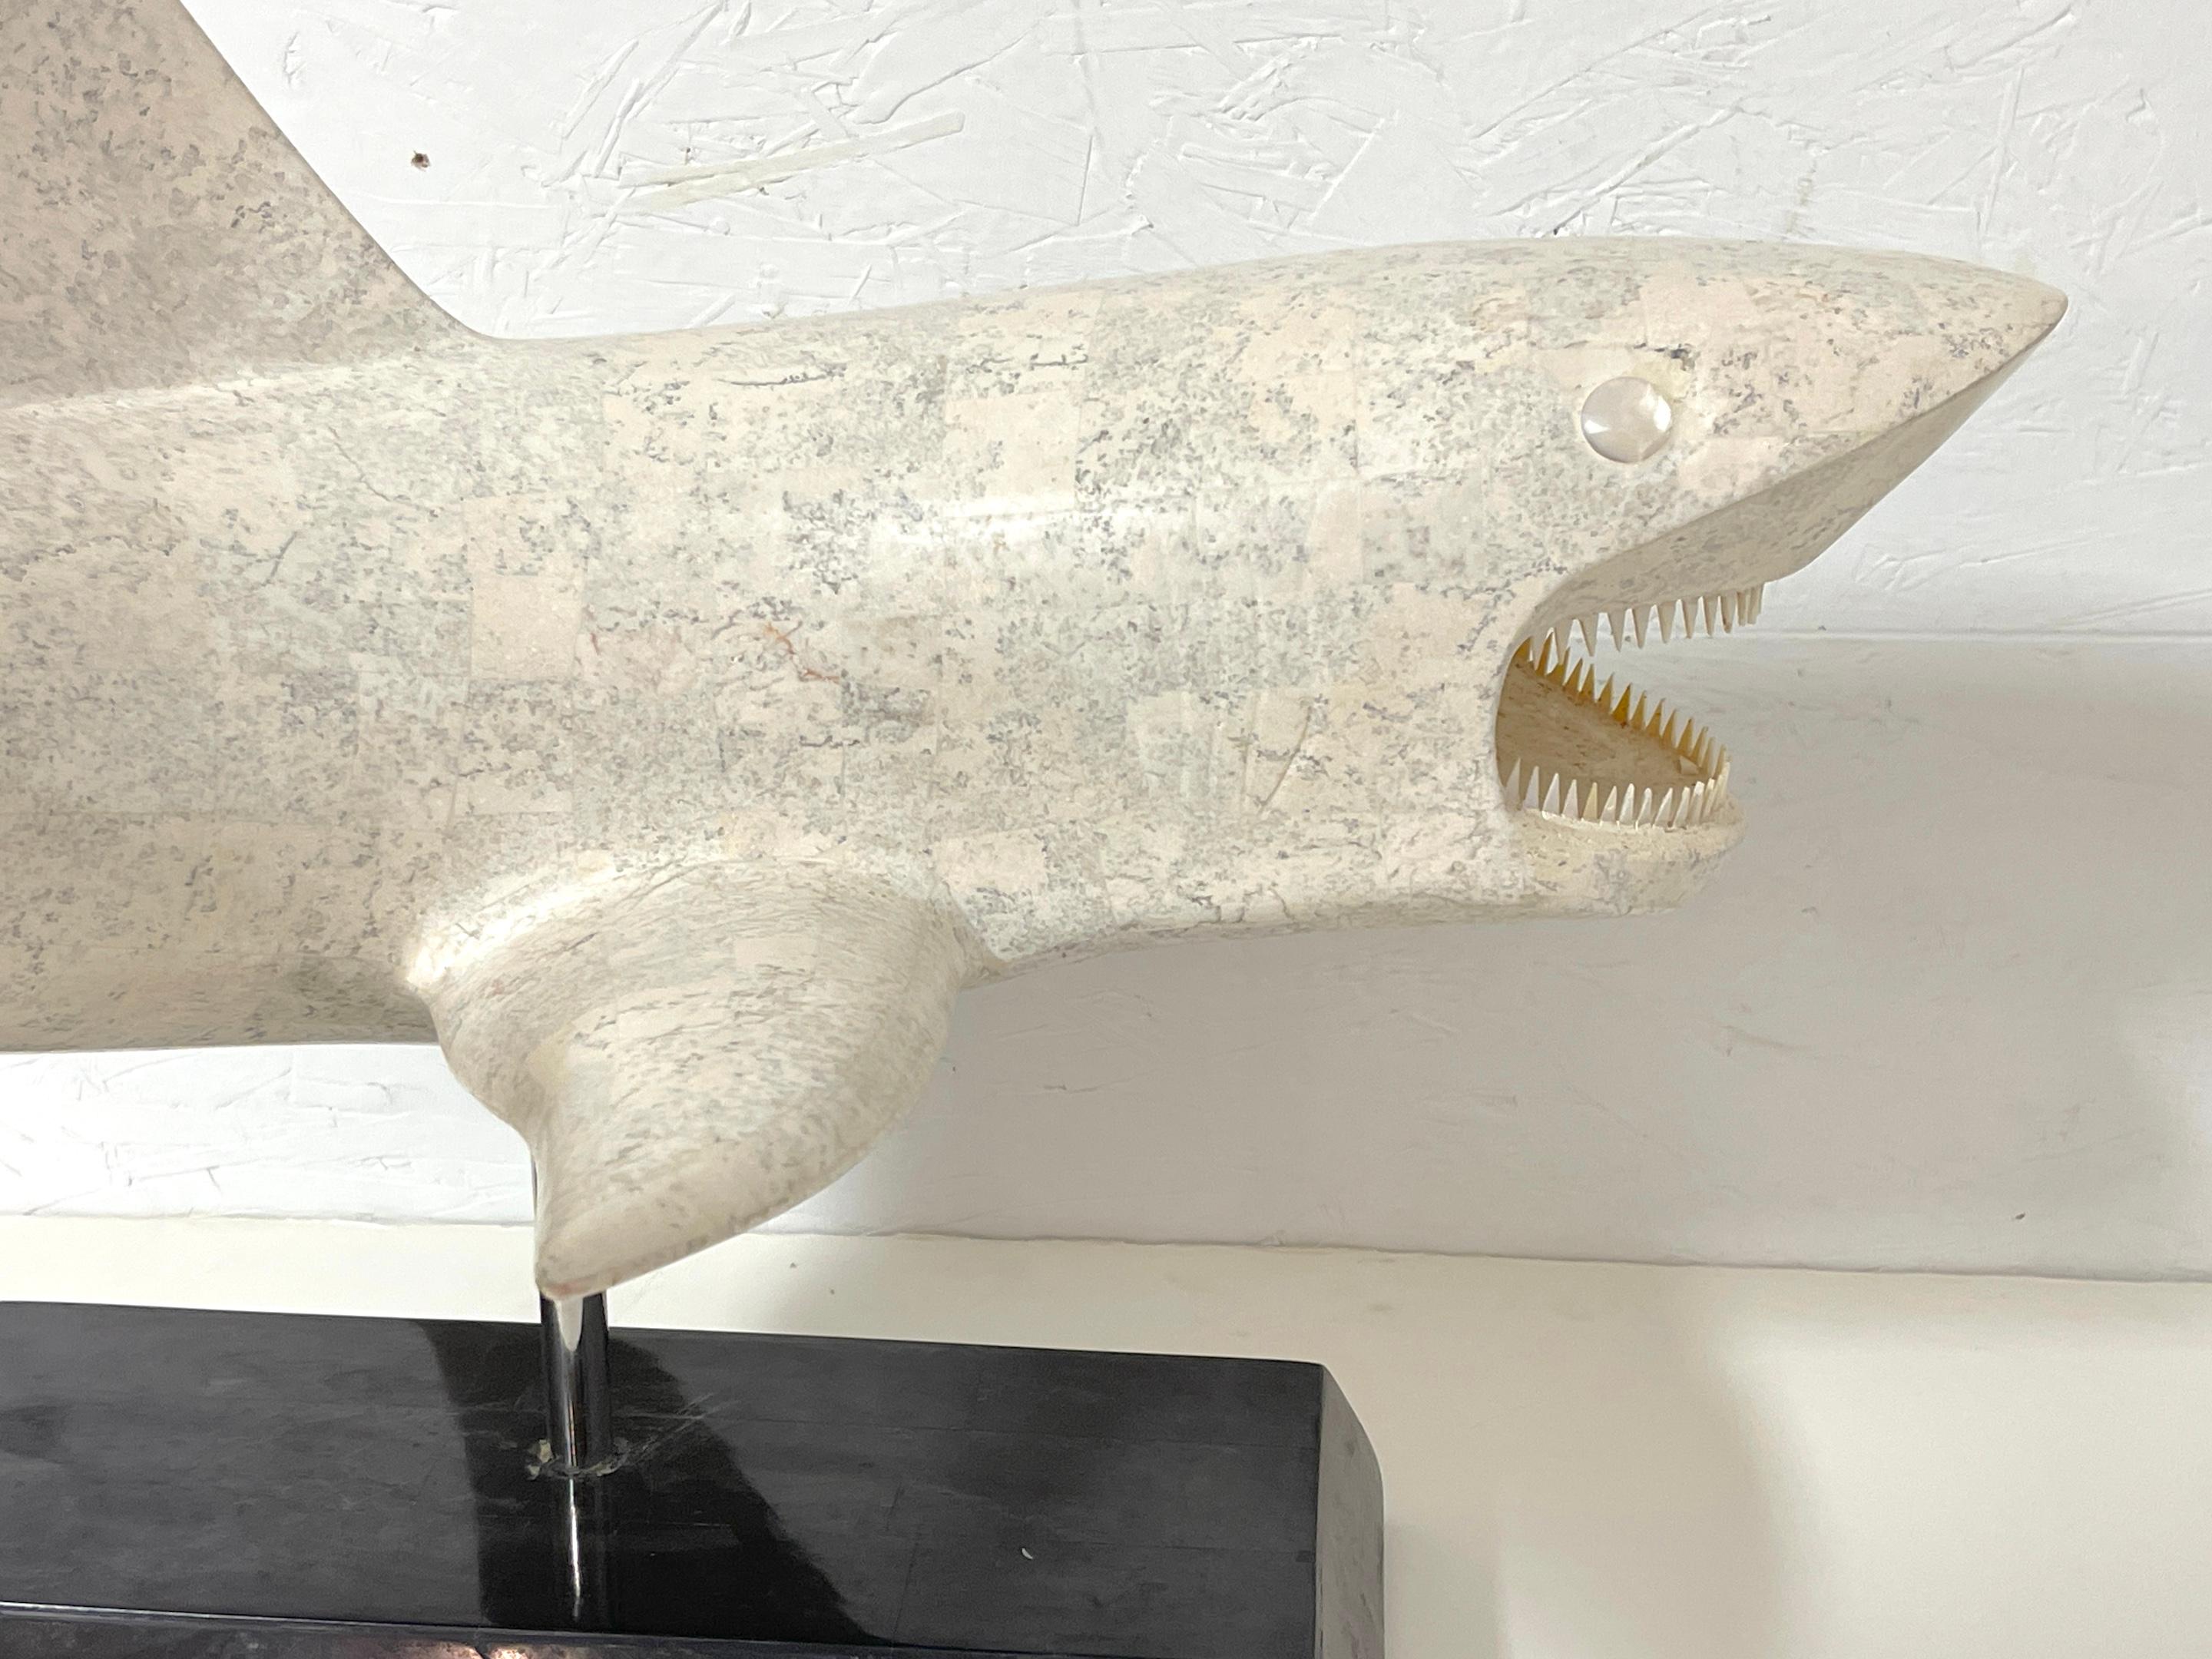 20th Century Large Modern Inlaid Tessellated Stone Sculpture of a Great White Shark   For Sale